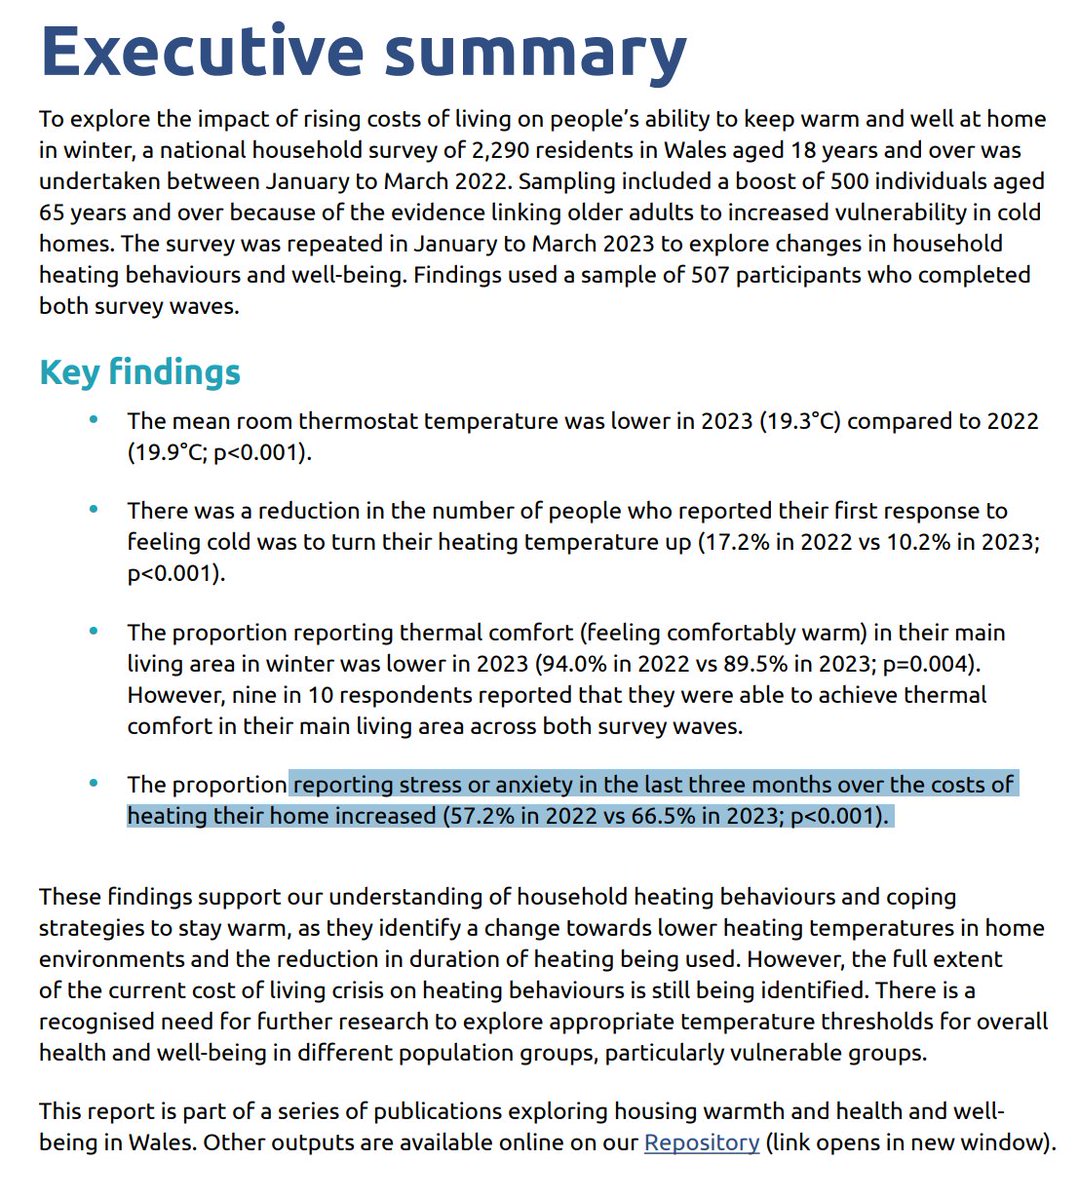 Study in Wales on housing warmth behaviours and changes 2022 to 2023 ⬇️putting heating on as 1st response (10.2% V 17.2% in 2022) ⬆️stress due to heating costs (66.5% V 57.2%) ⬇️main room temp (19.3dg V 19.9) >1 in 10 (11.3%) reducing/skipping meals due to heating costs(9.1%)